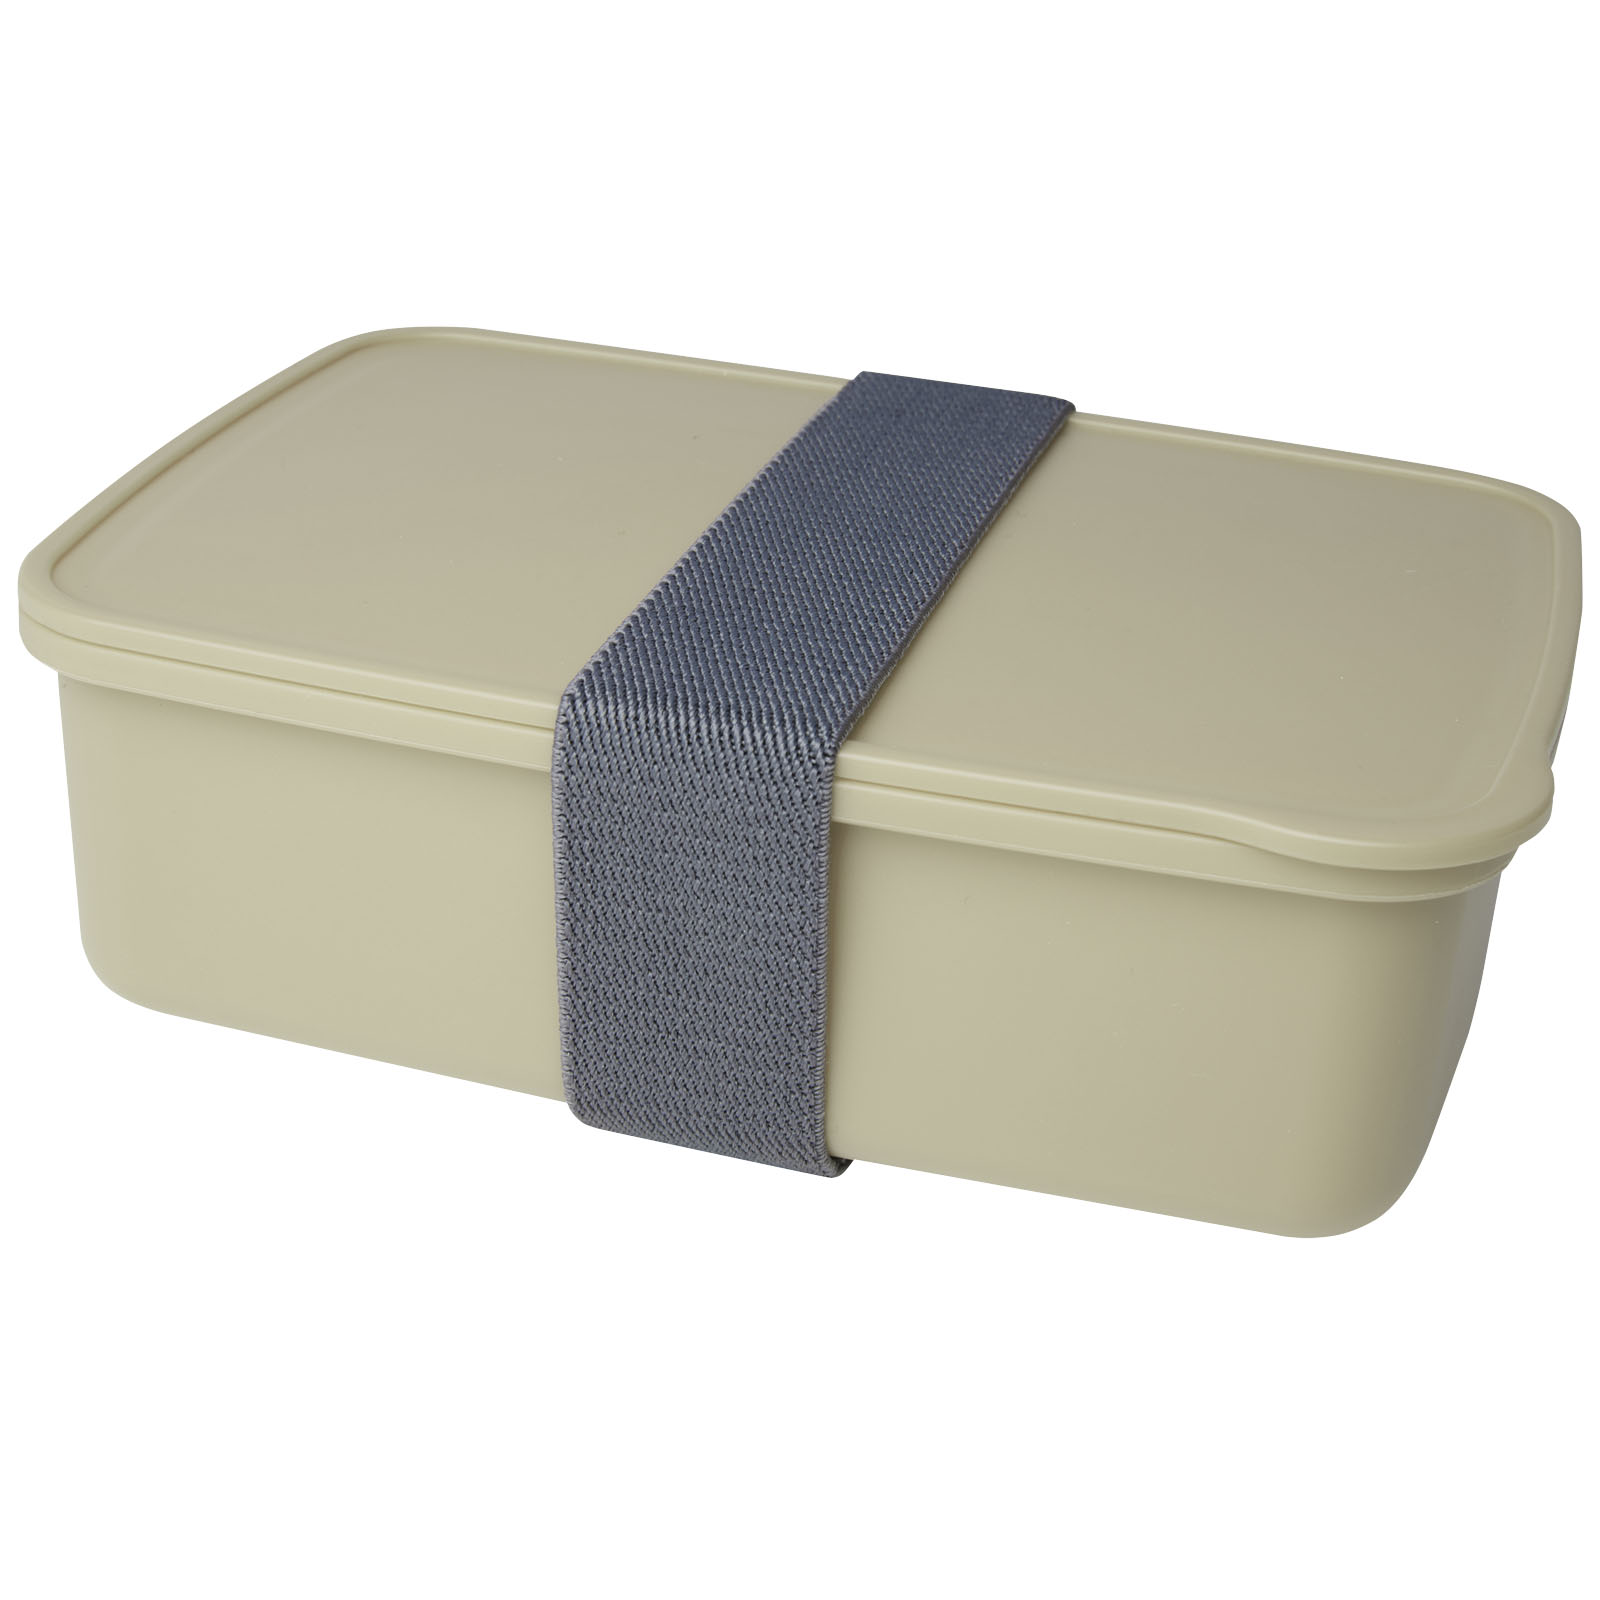 Lunch Boxes - Dovi recycled plastic lunch box